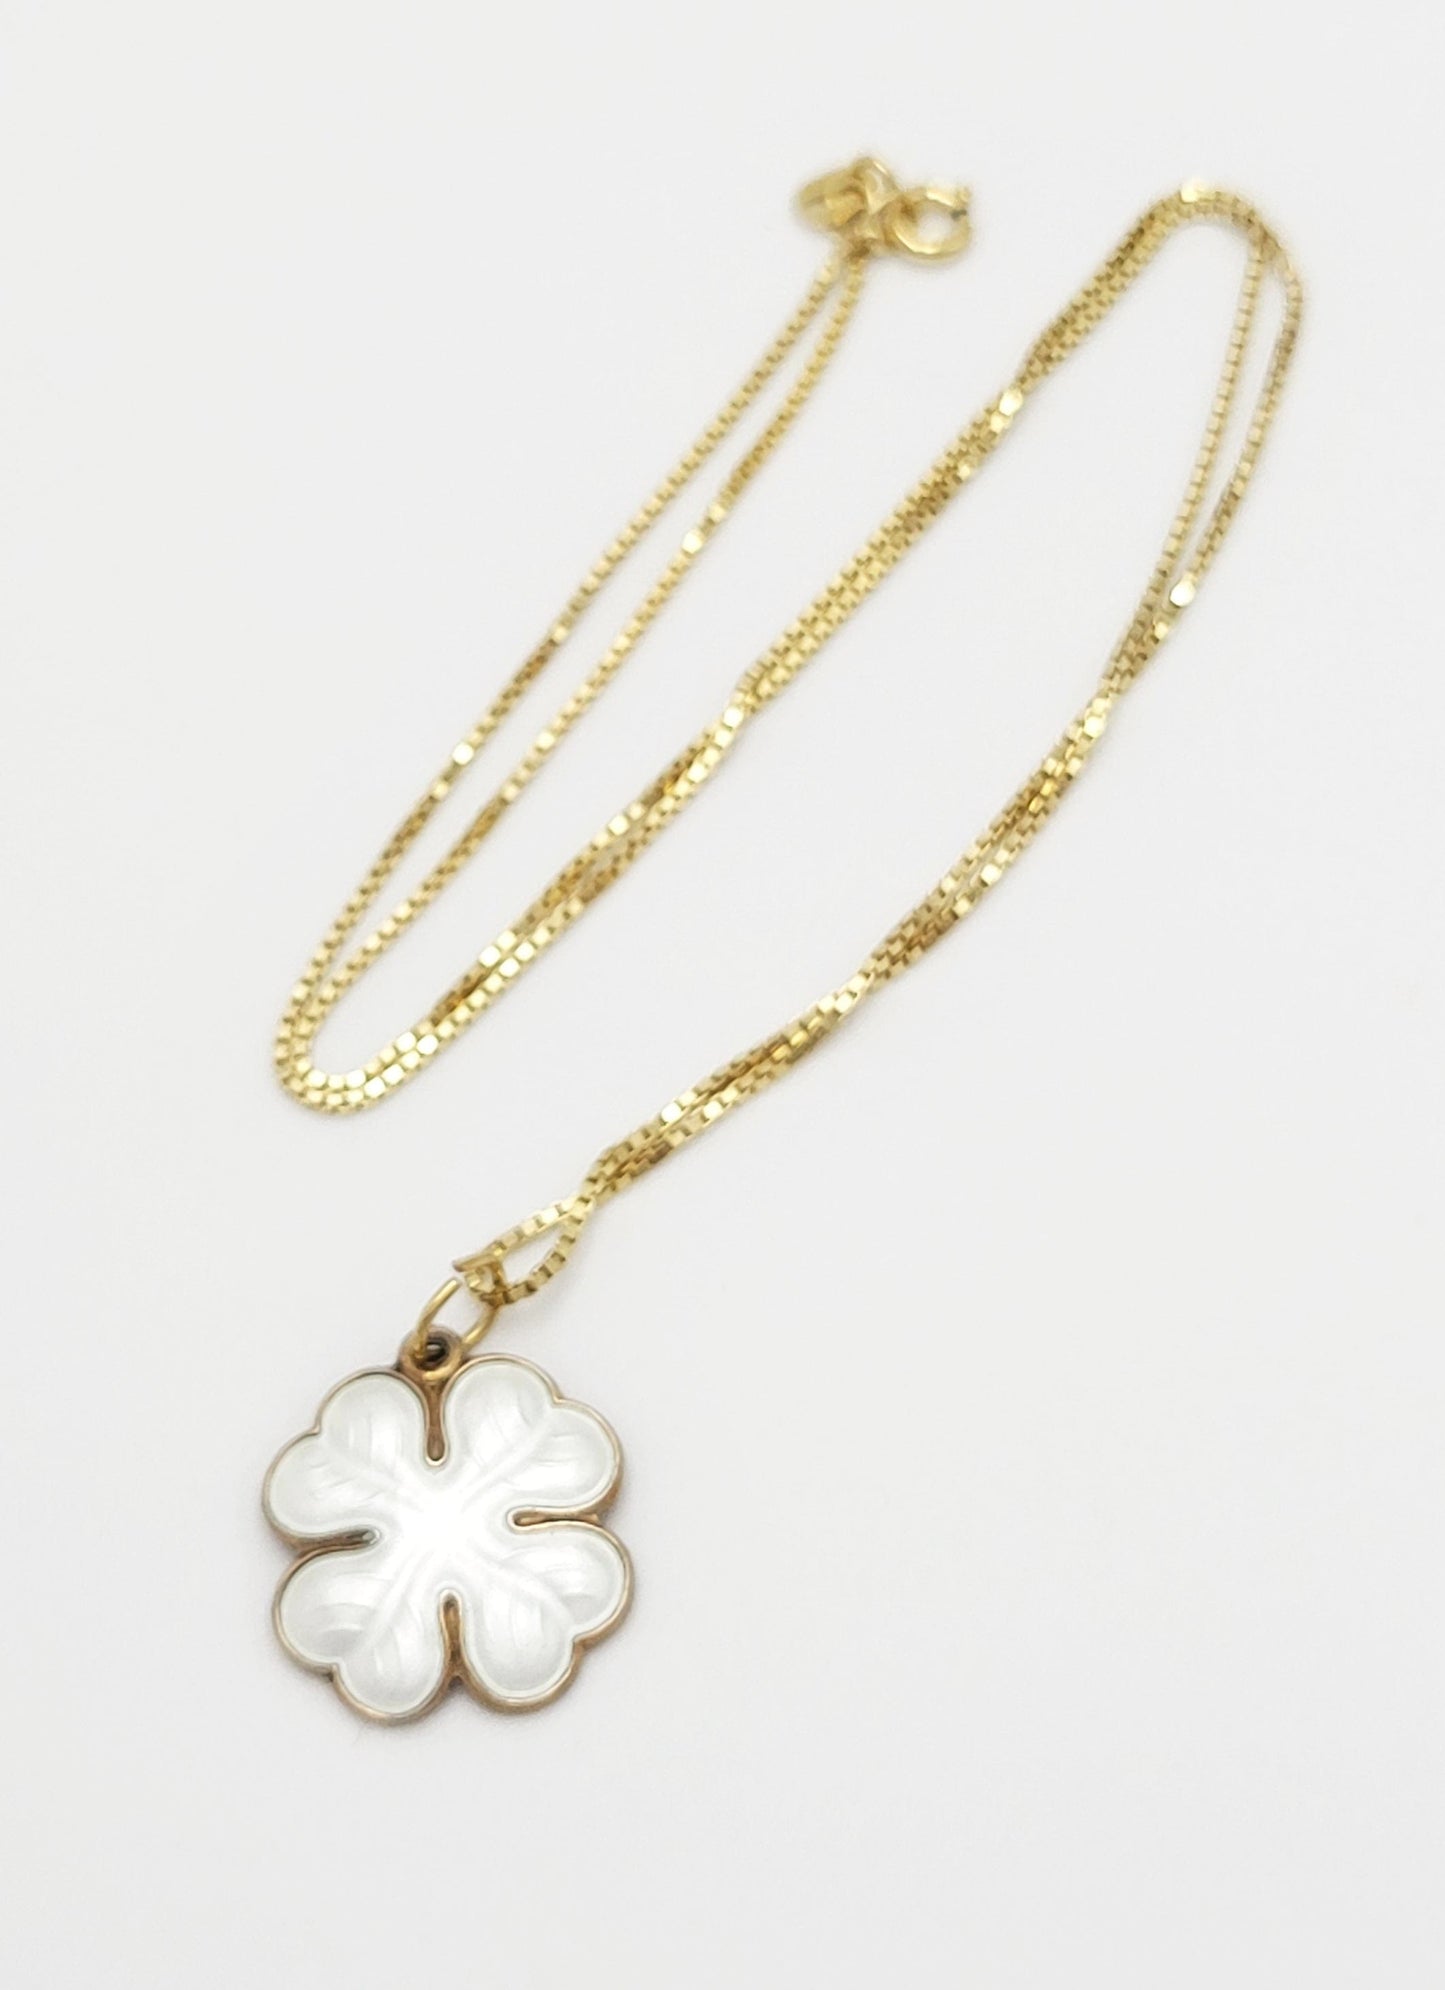 Ivar Holth Jewelry Ivar Holth Norway Sterling & Enamel Lucky 4 Leaf Clover Necklace Circa 1950s